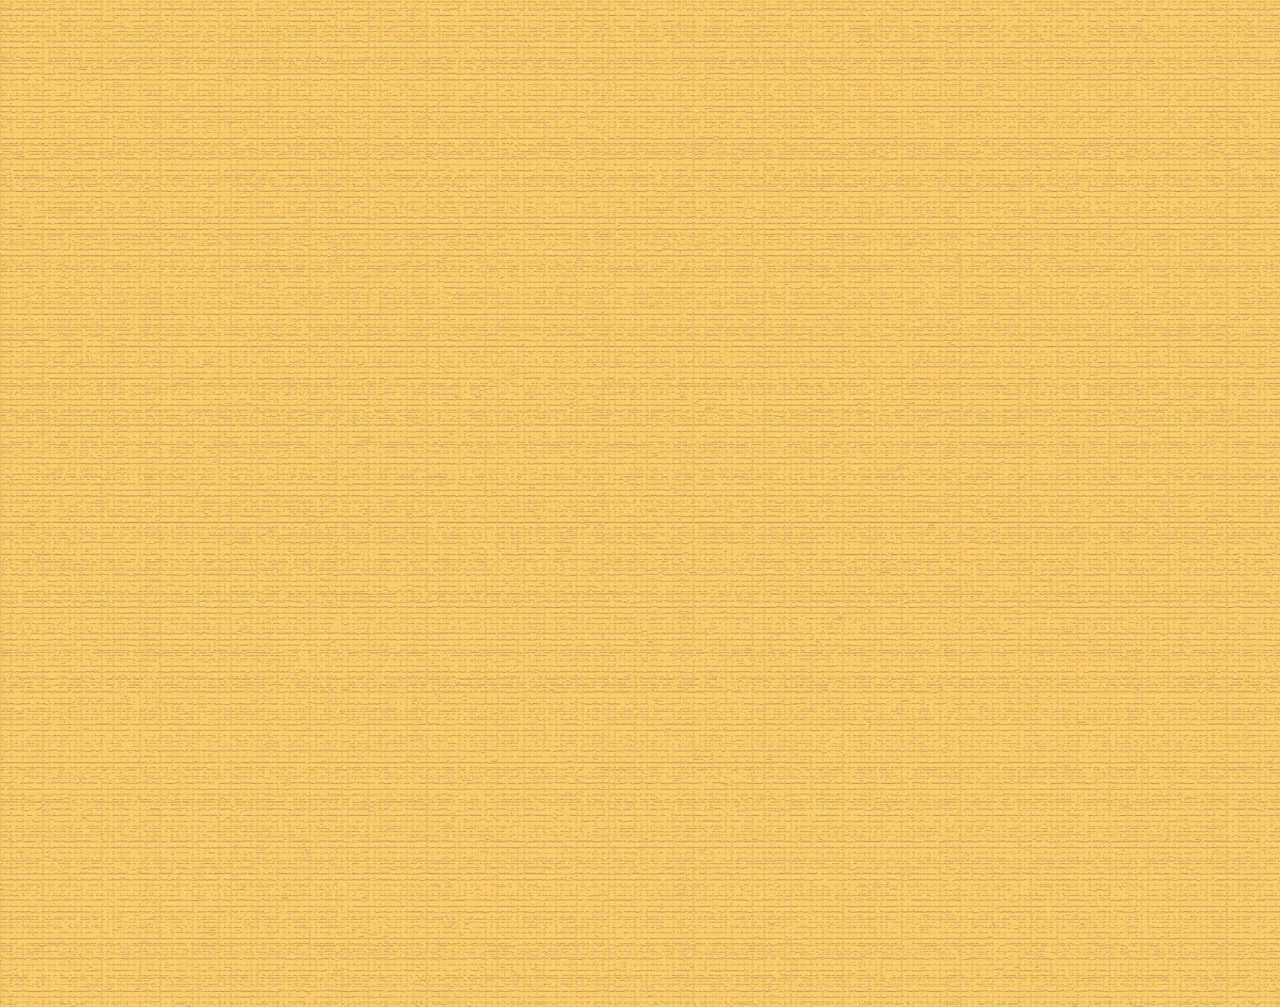 Solid Yellow Background Color